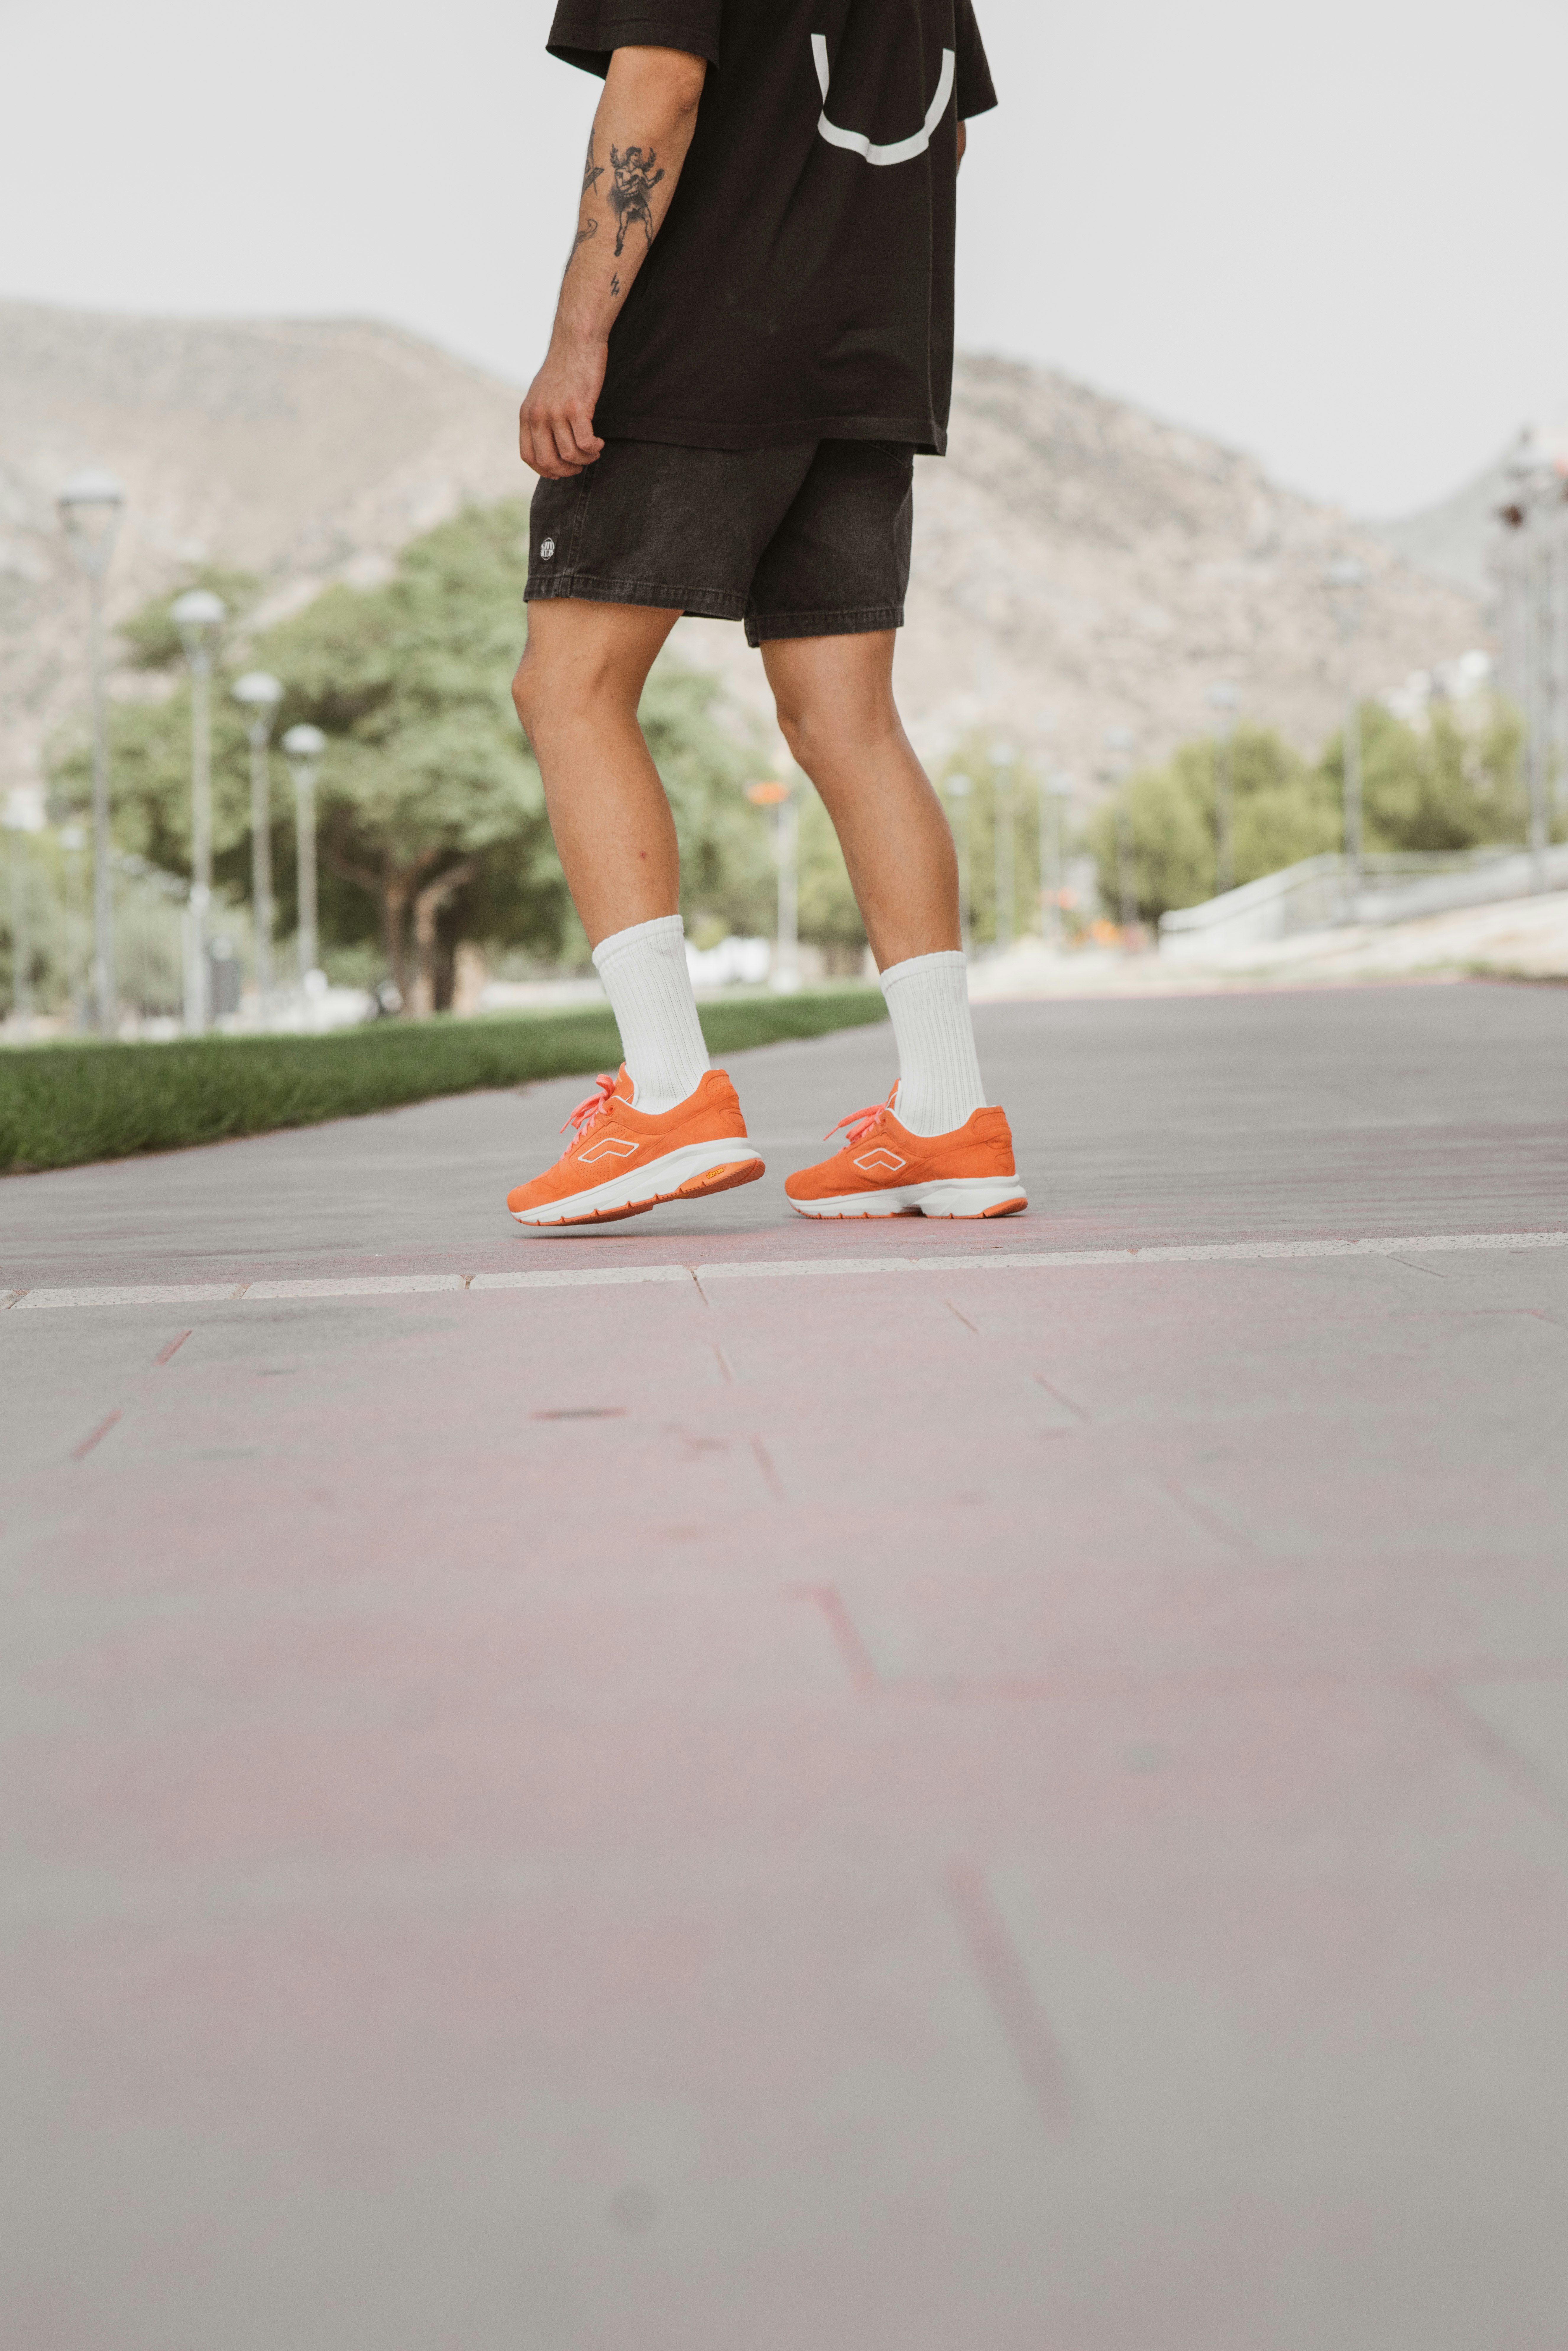 woman in black skirt and orange and white nike sneakers standing on gray concrete floor during